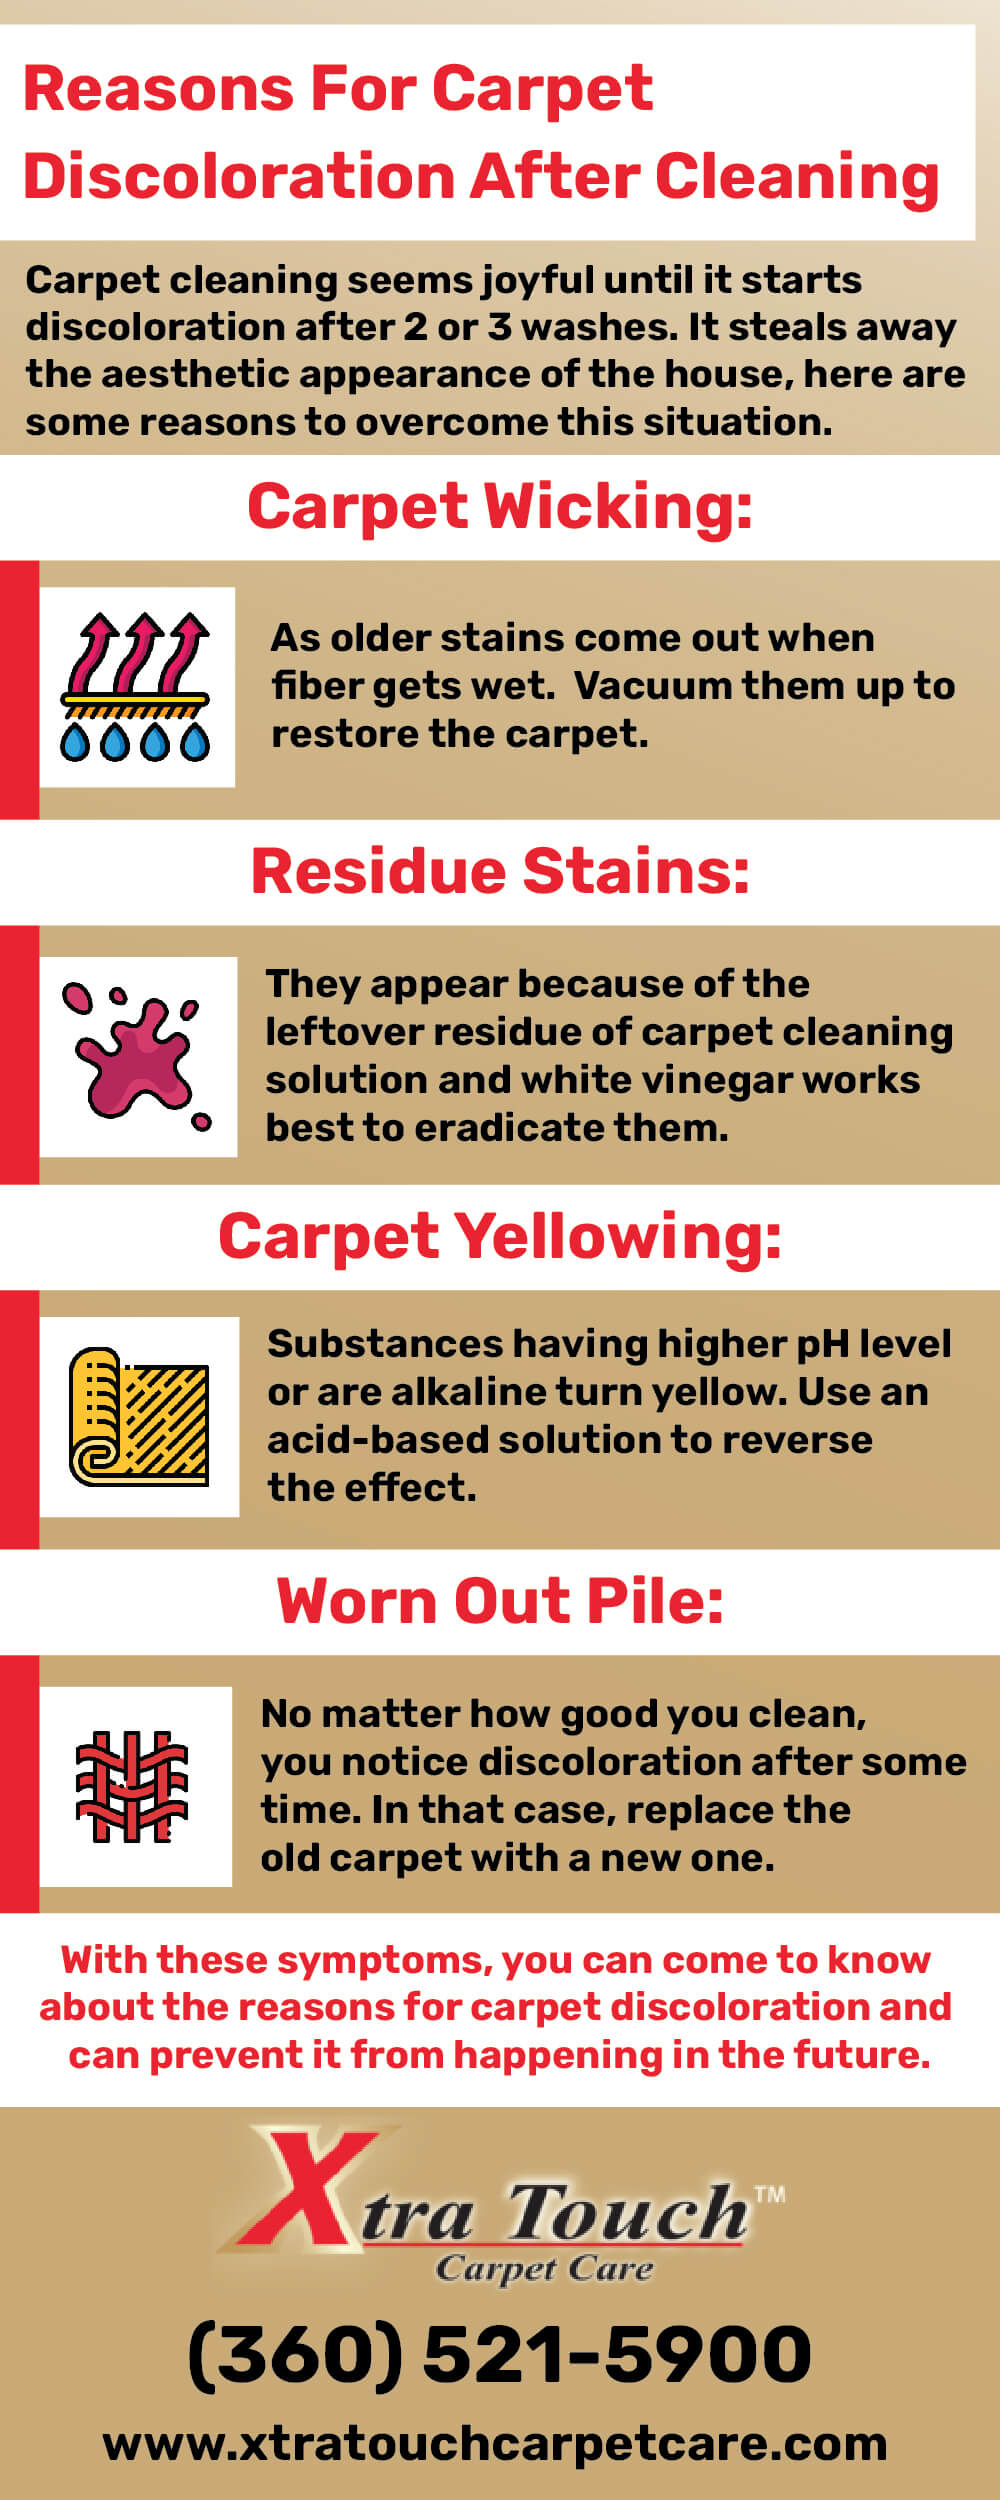 Reasons For Carpet Discoloration After Cleaning